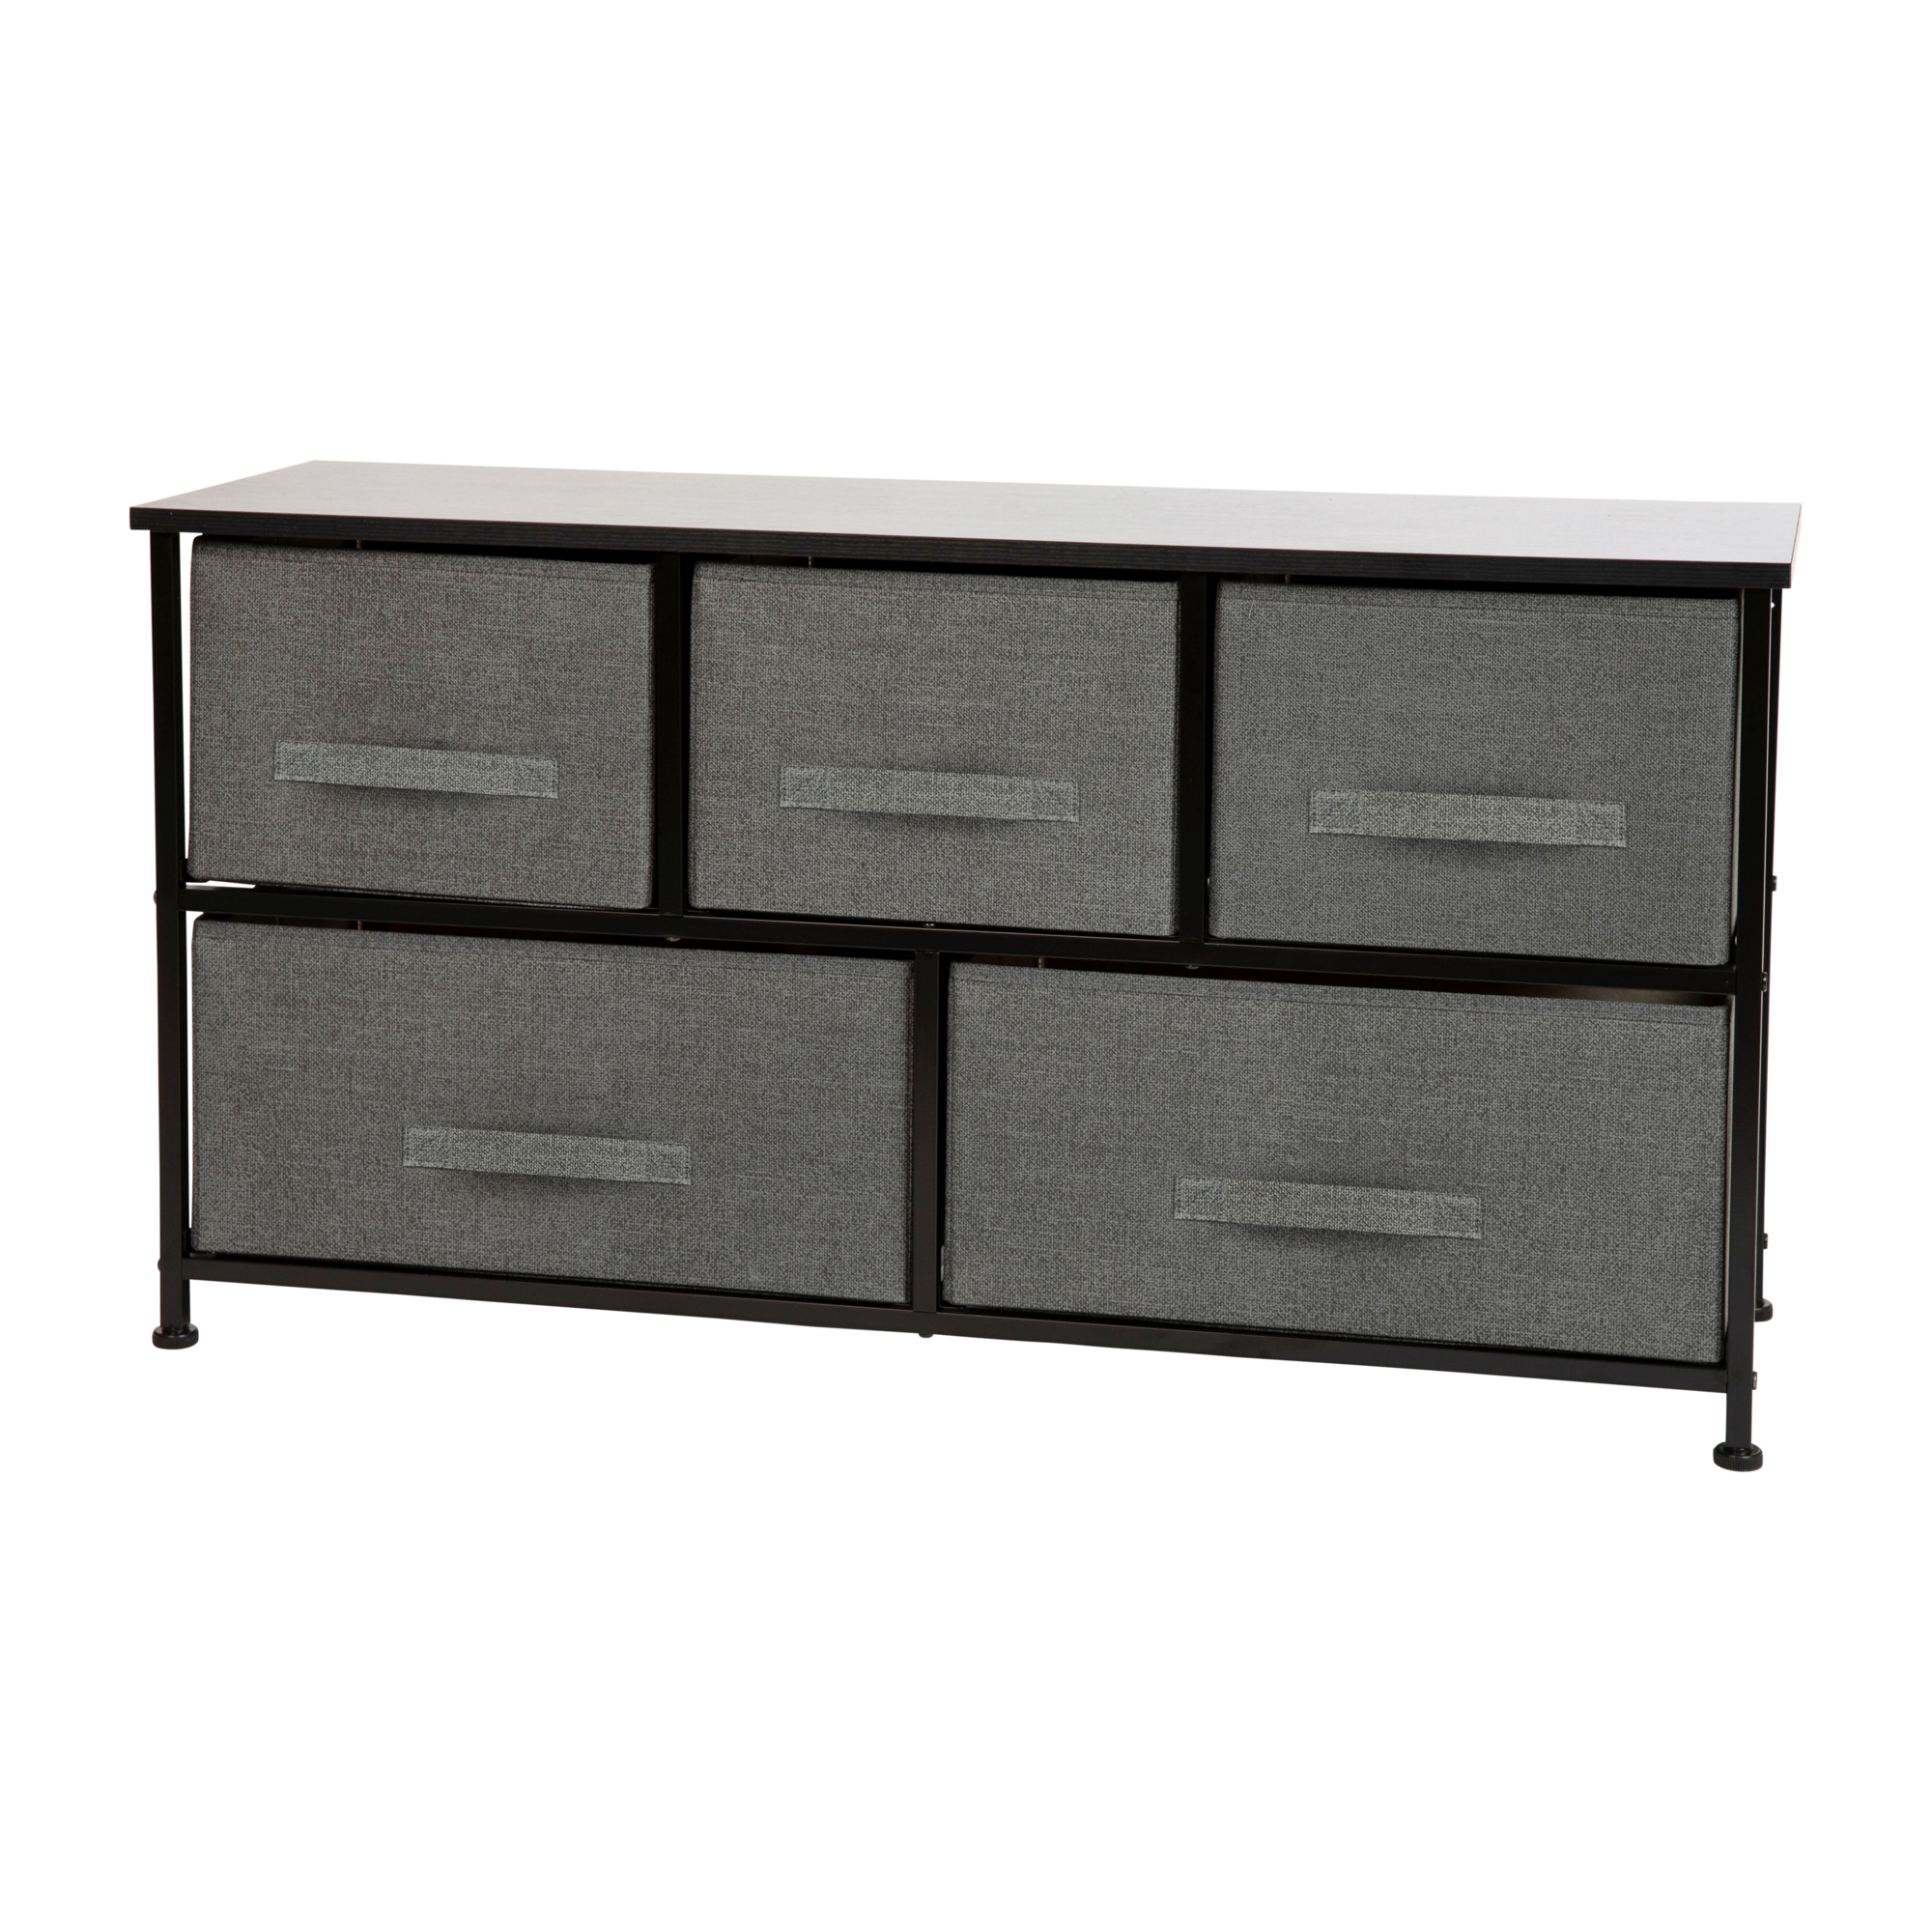 Flash Furniture, Black/Gray 5 Drawer Storage Chest Organizer, Height 21.5 in, Width 39.5 in, Color Black, Model WX5L206XBKGR